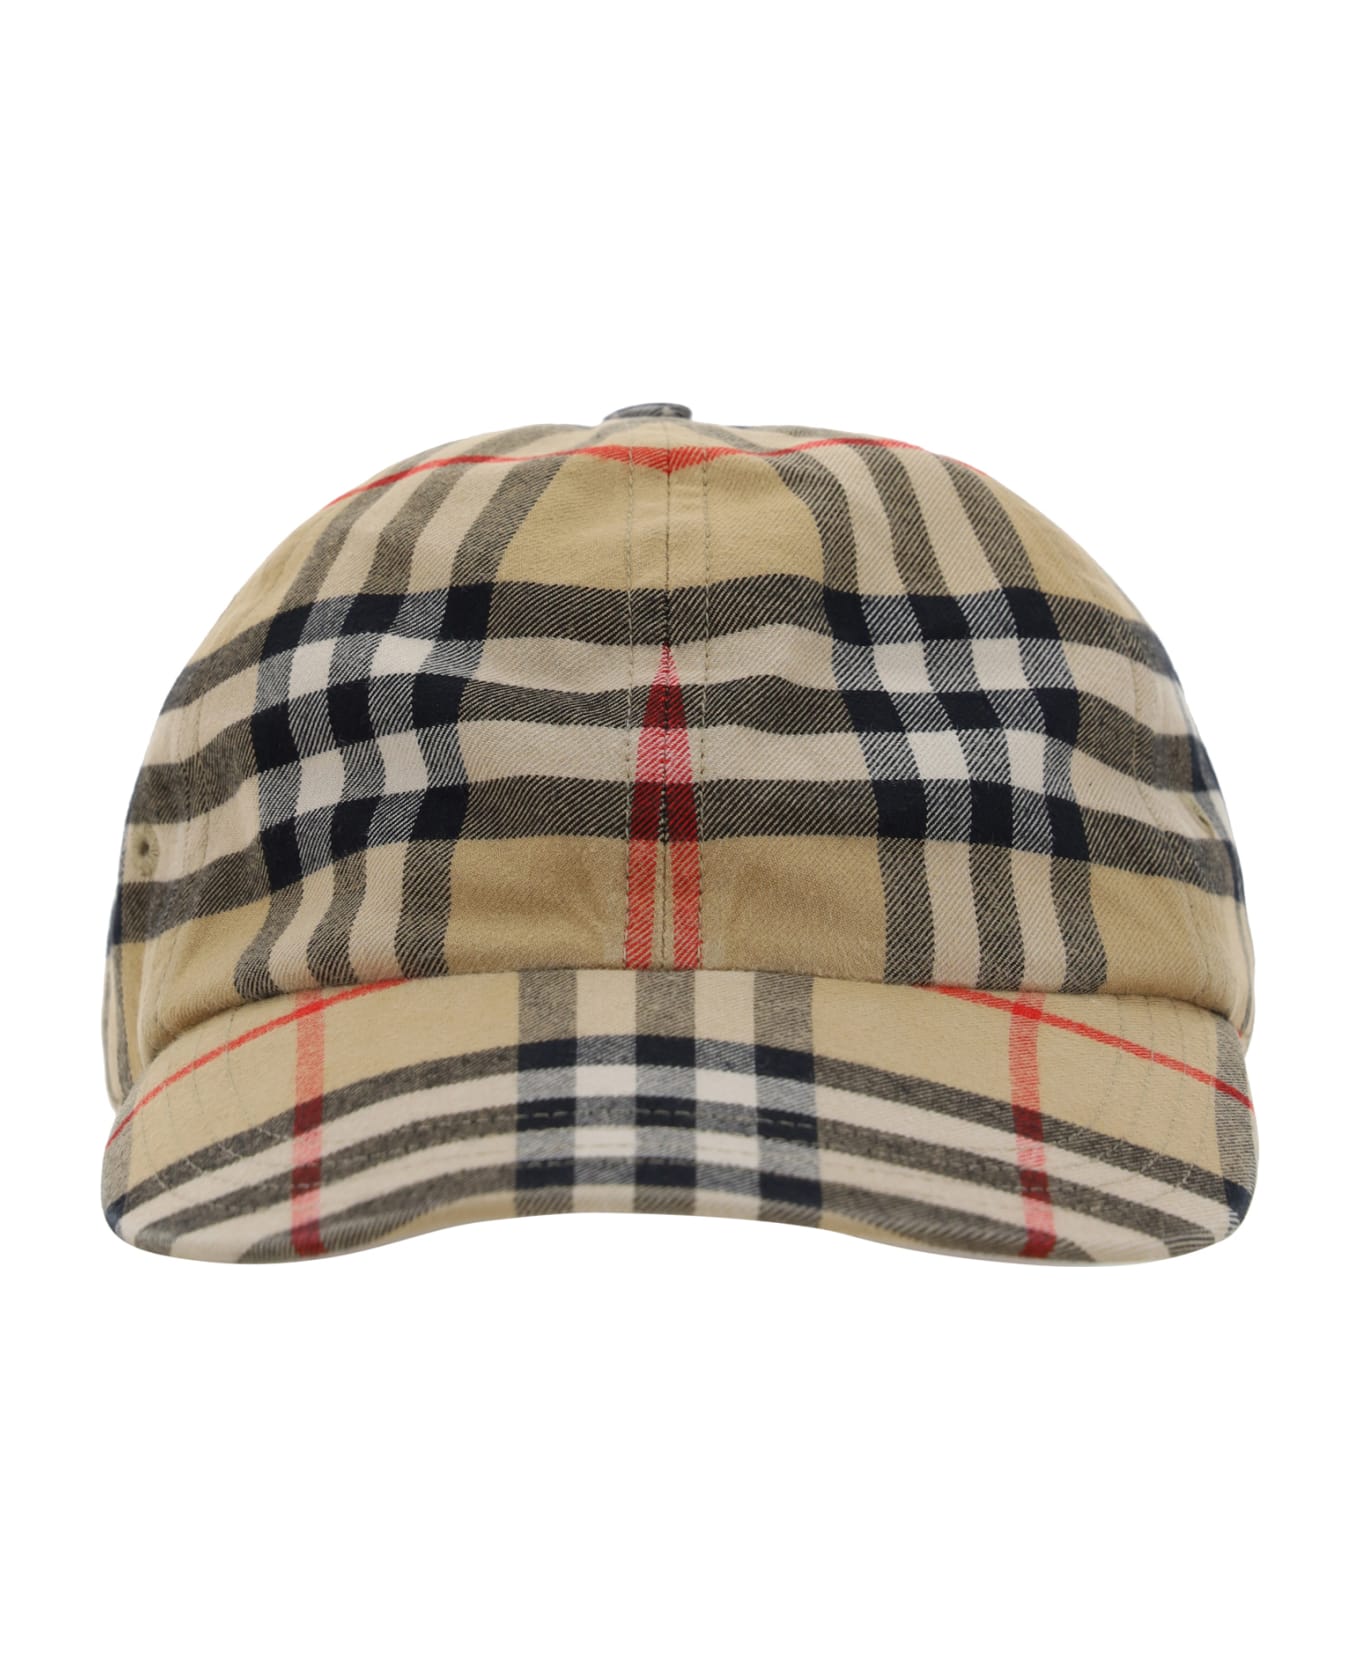 Burberry Baseball Cap With Check Print - Archive Beige 帽子